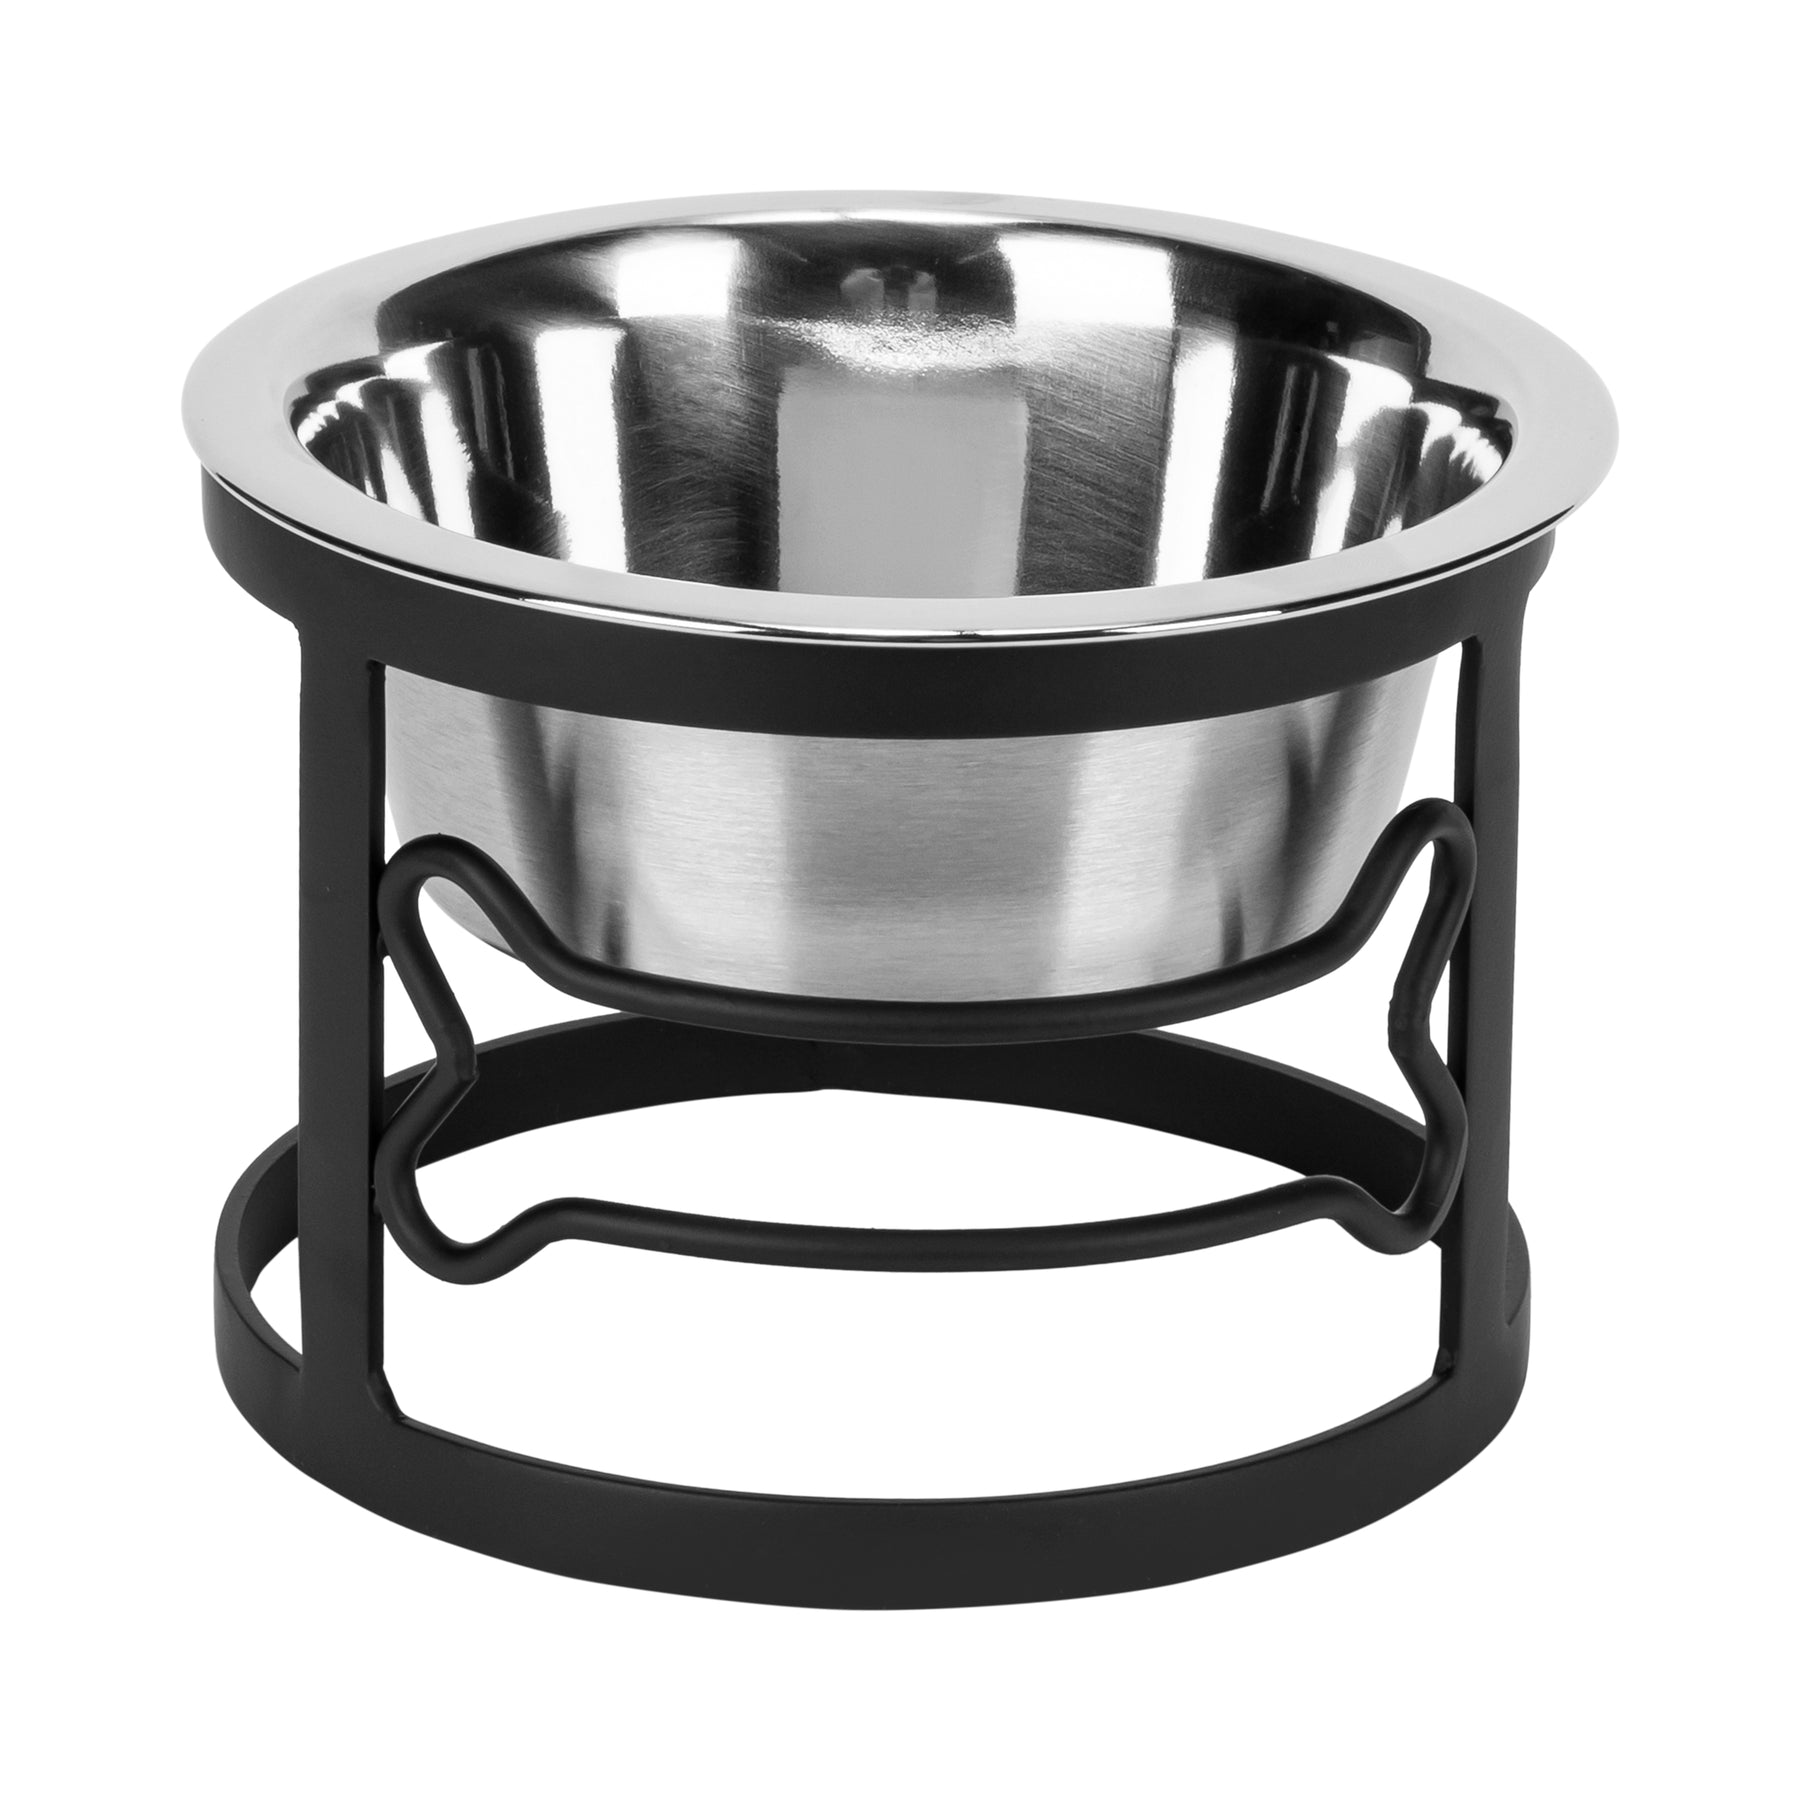 Small/ Large Size Double Dog Bowl Pet Feeding Station Stainless Steel Water  and Food Bowls Feeder Solution for Small Dogs and Cats